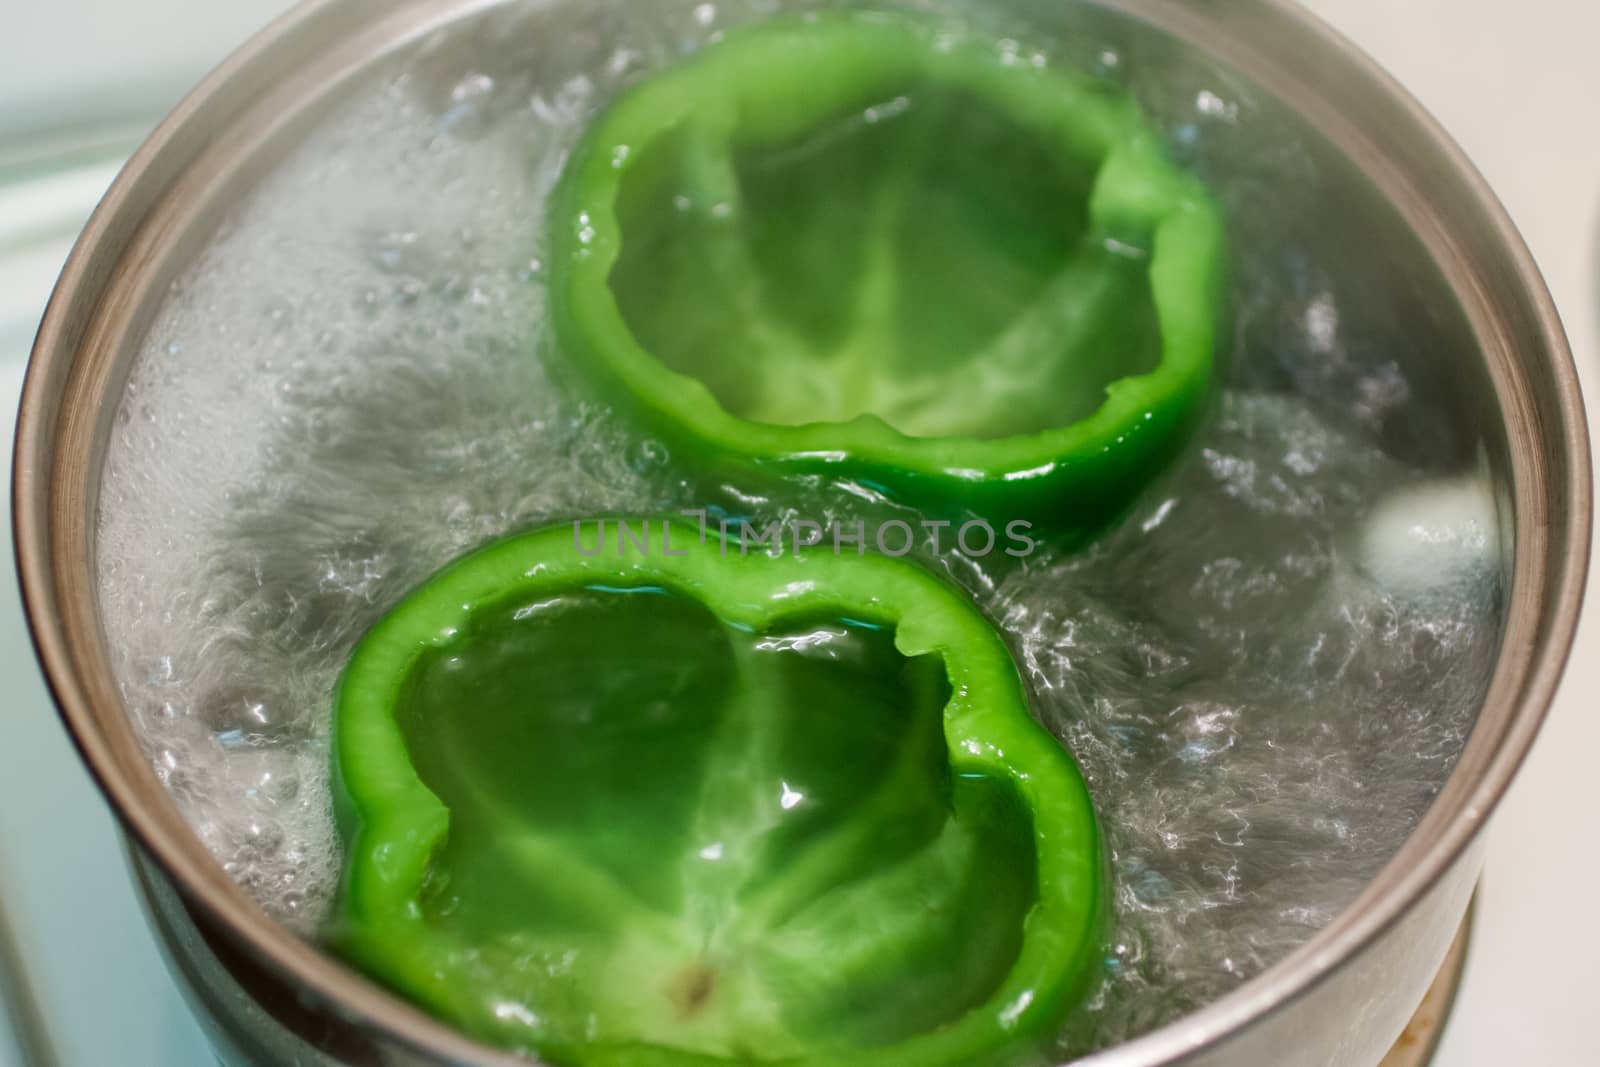 Green bell peppers cut and cleaned for stuffed peppers.